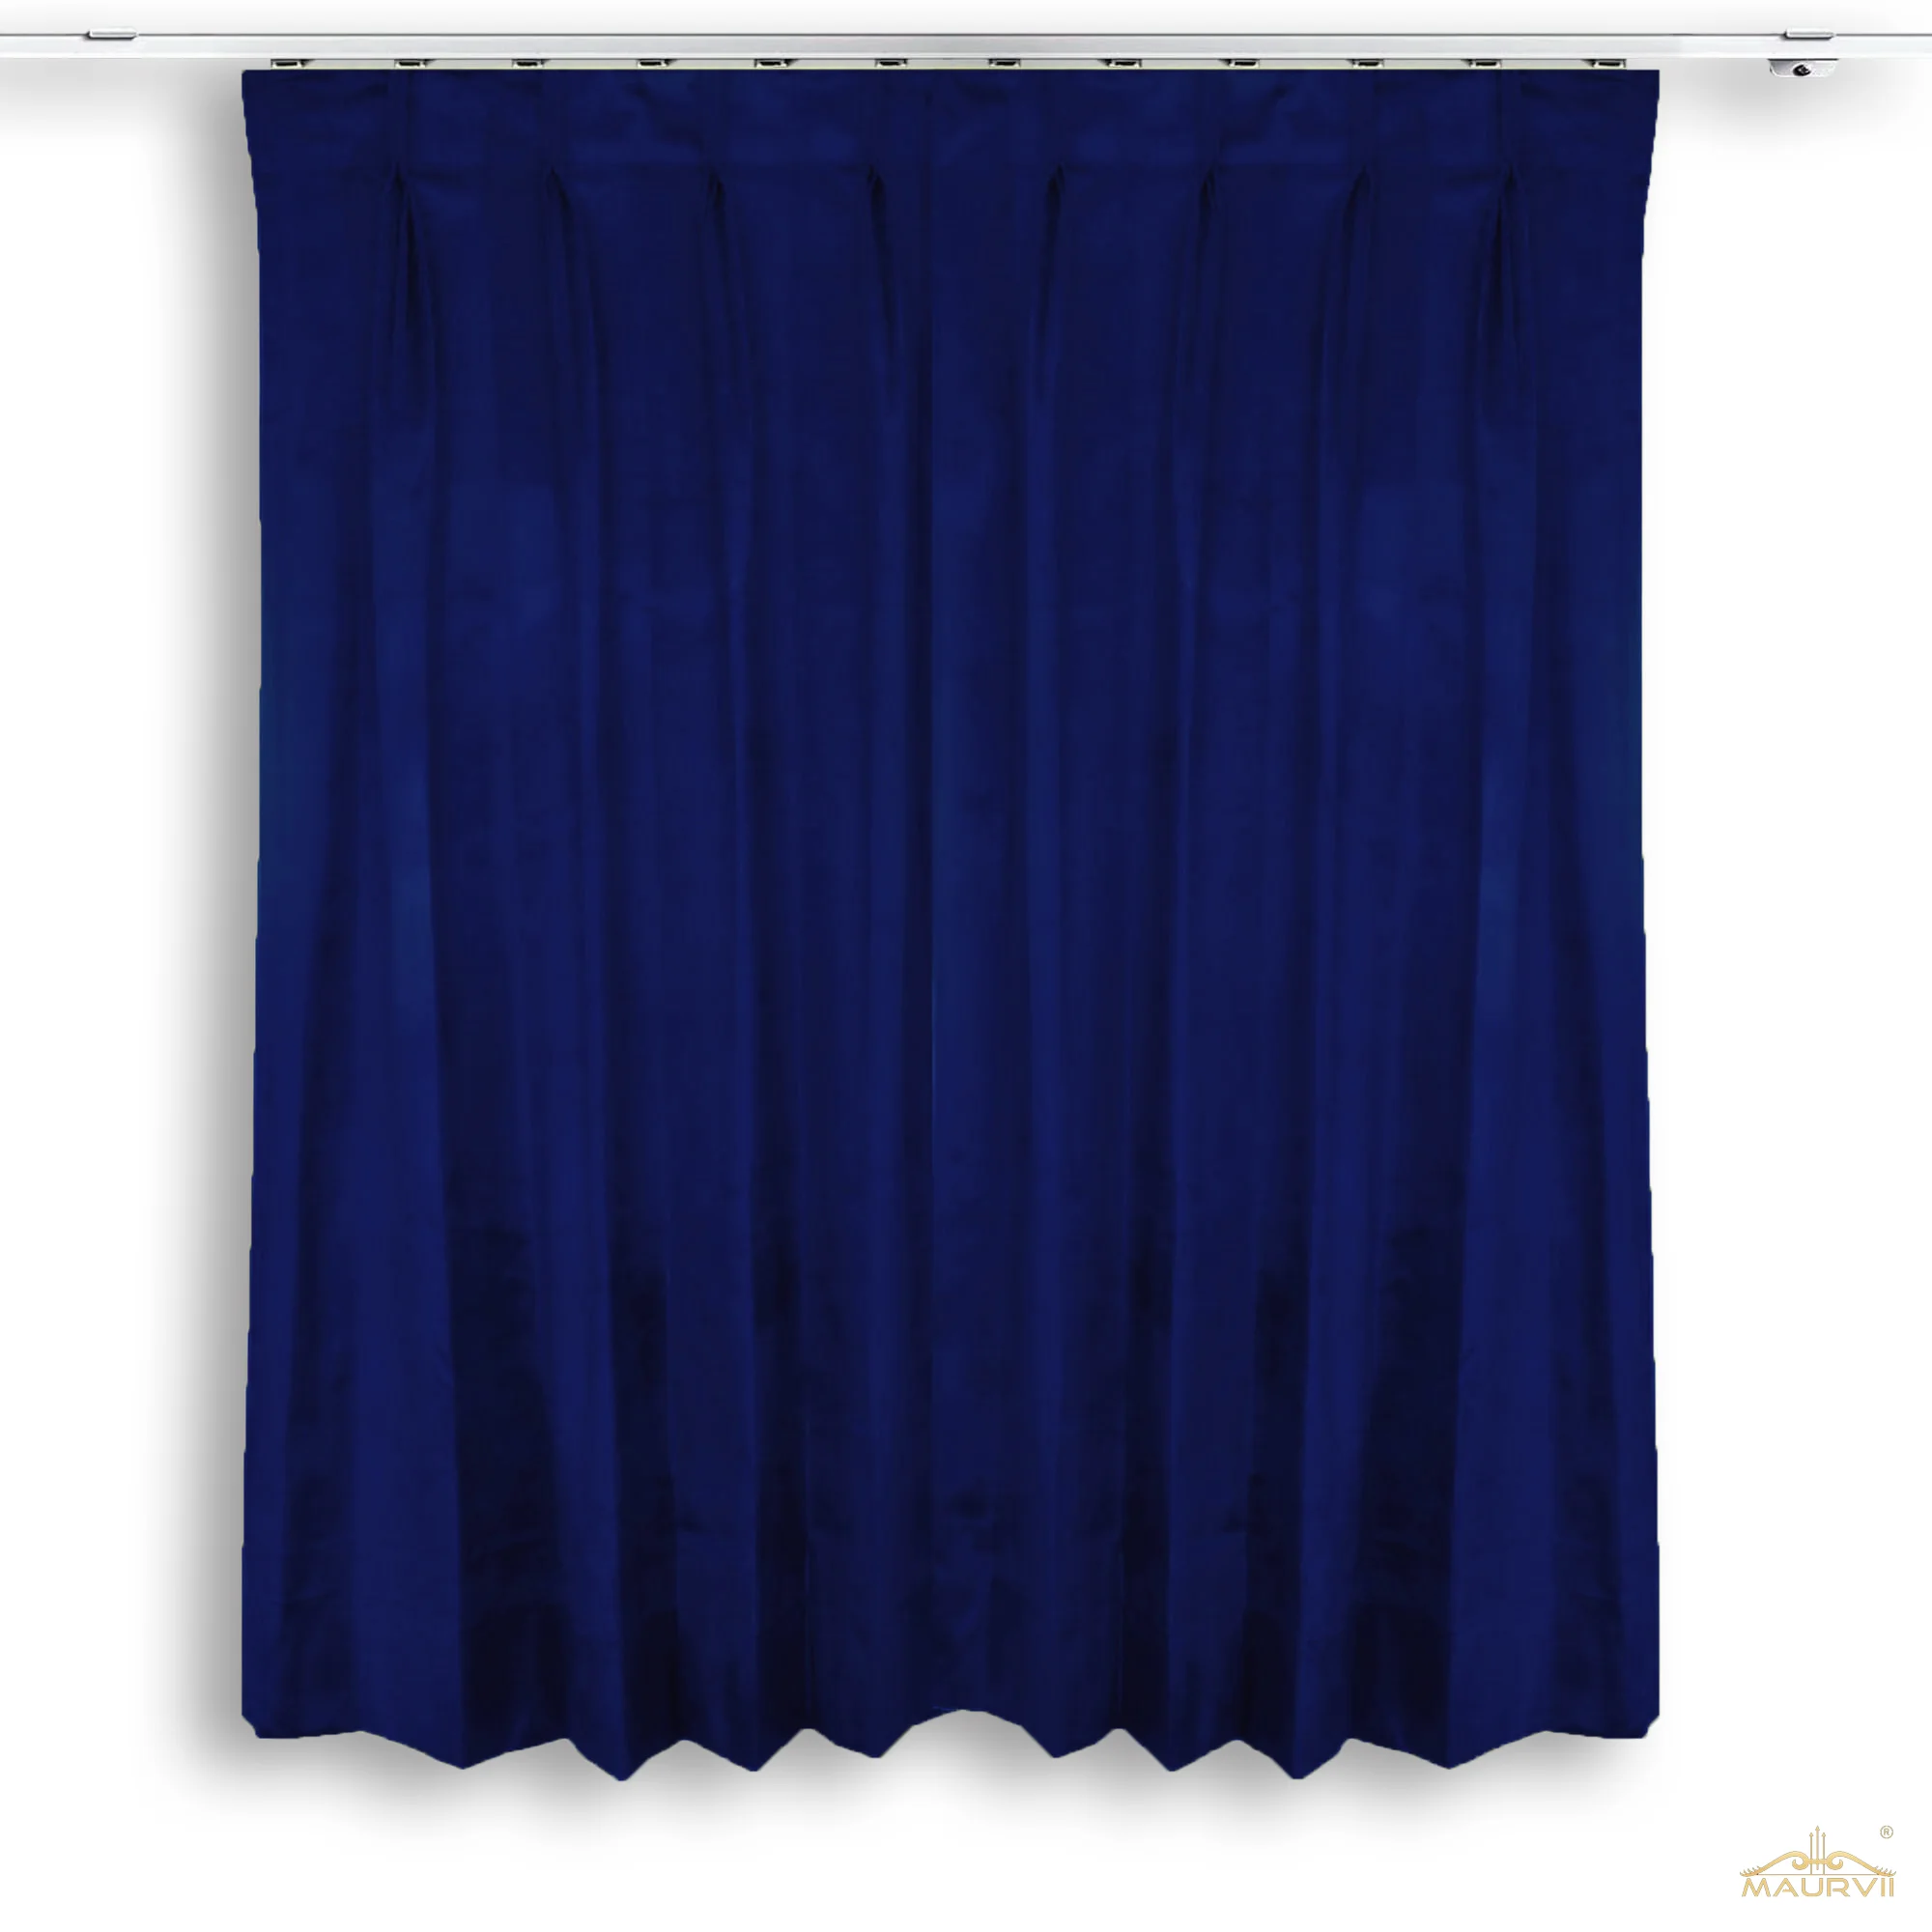 Double pleated velvet stage curtains in navy blue color